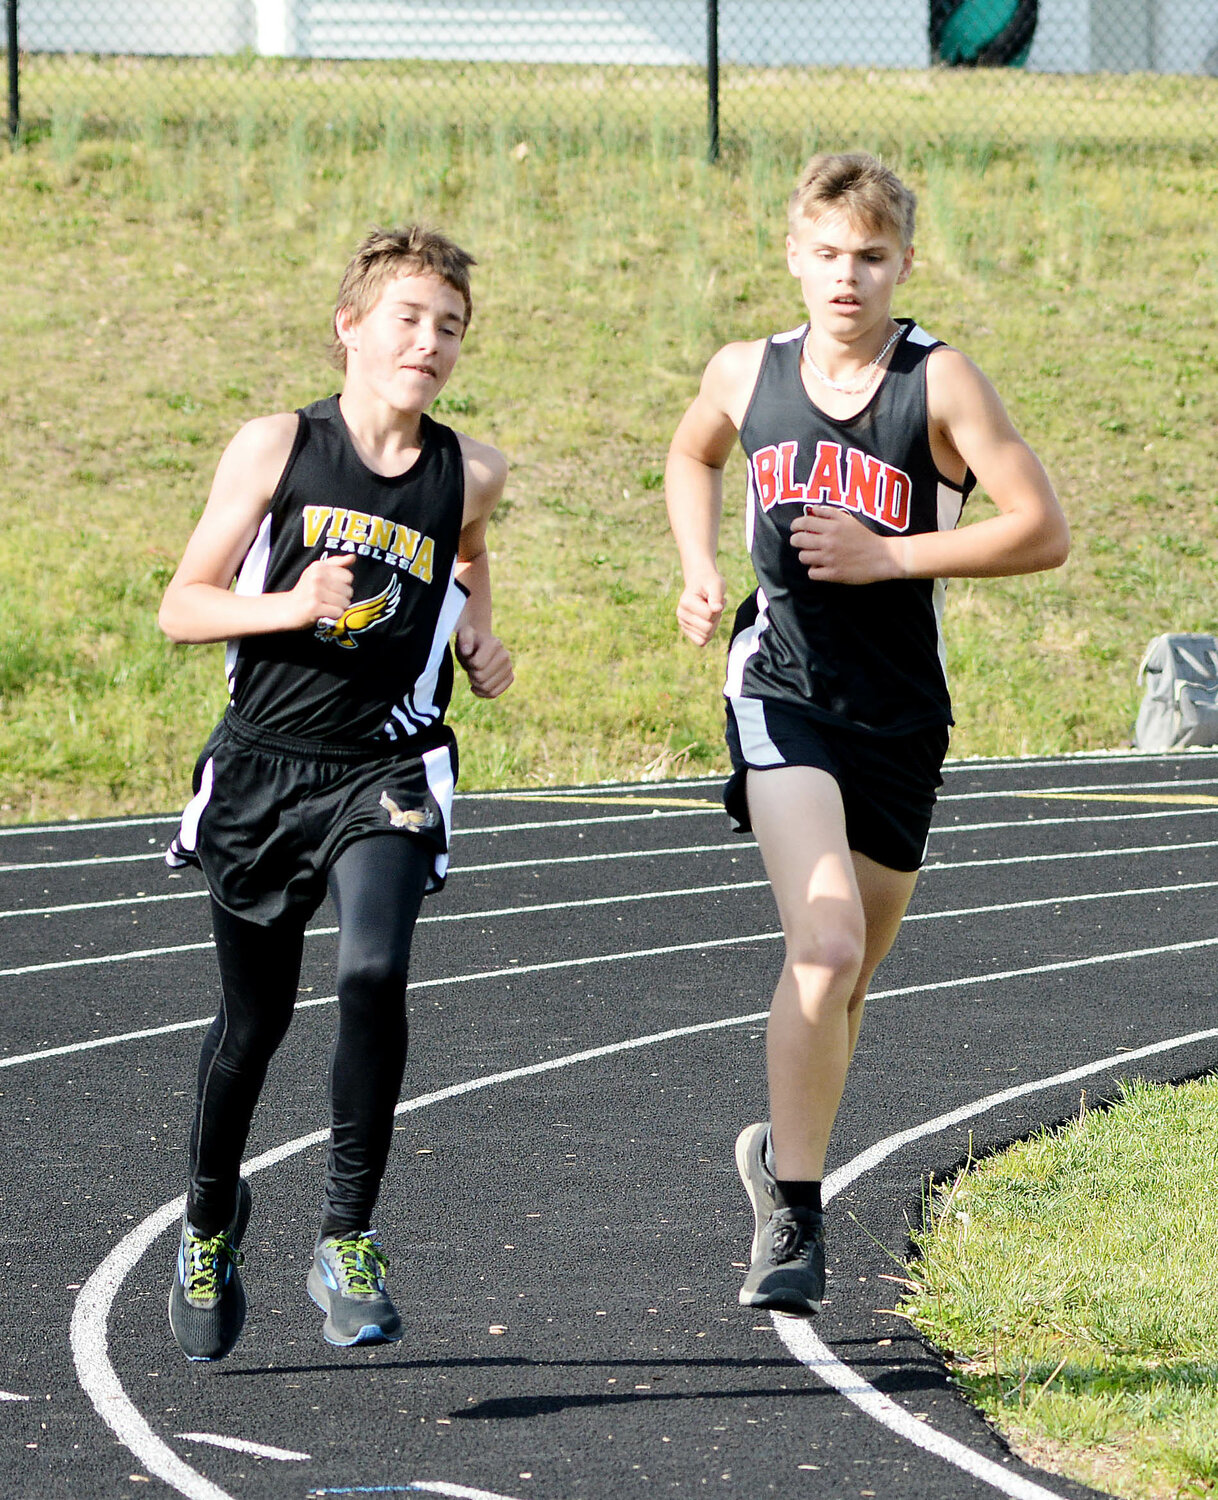 Dalton Timm and Karsin Siefert (from left) represent Maries County in the boys 1600m run during Vienna’s Black and Gold Invitational track meet Monday.